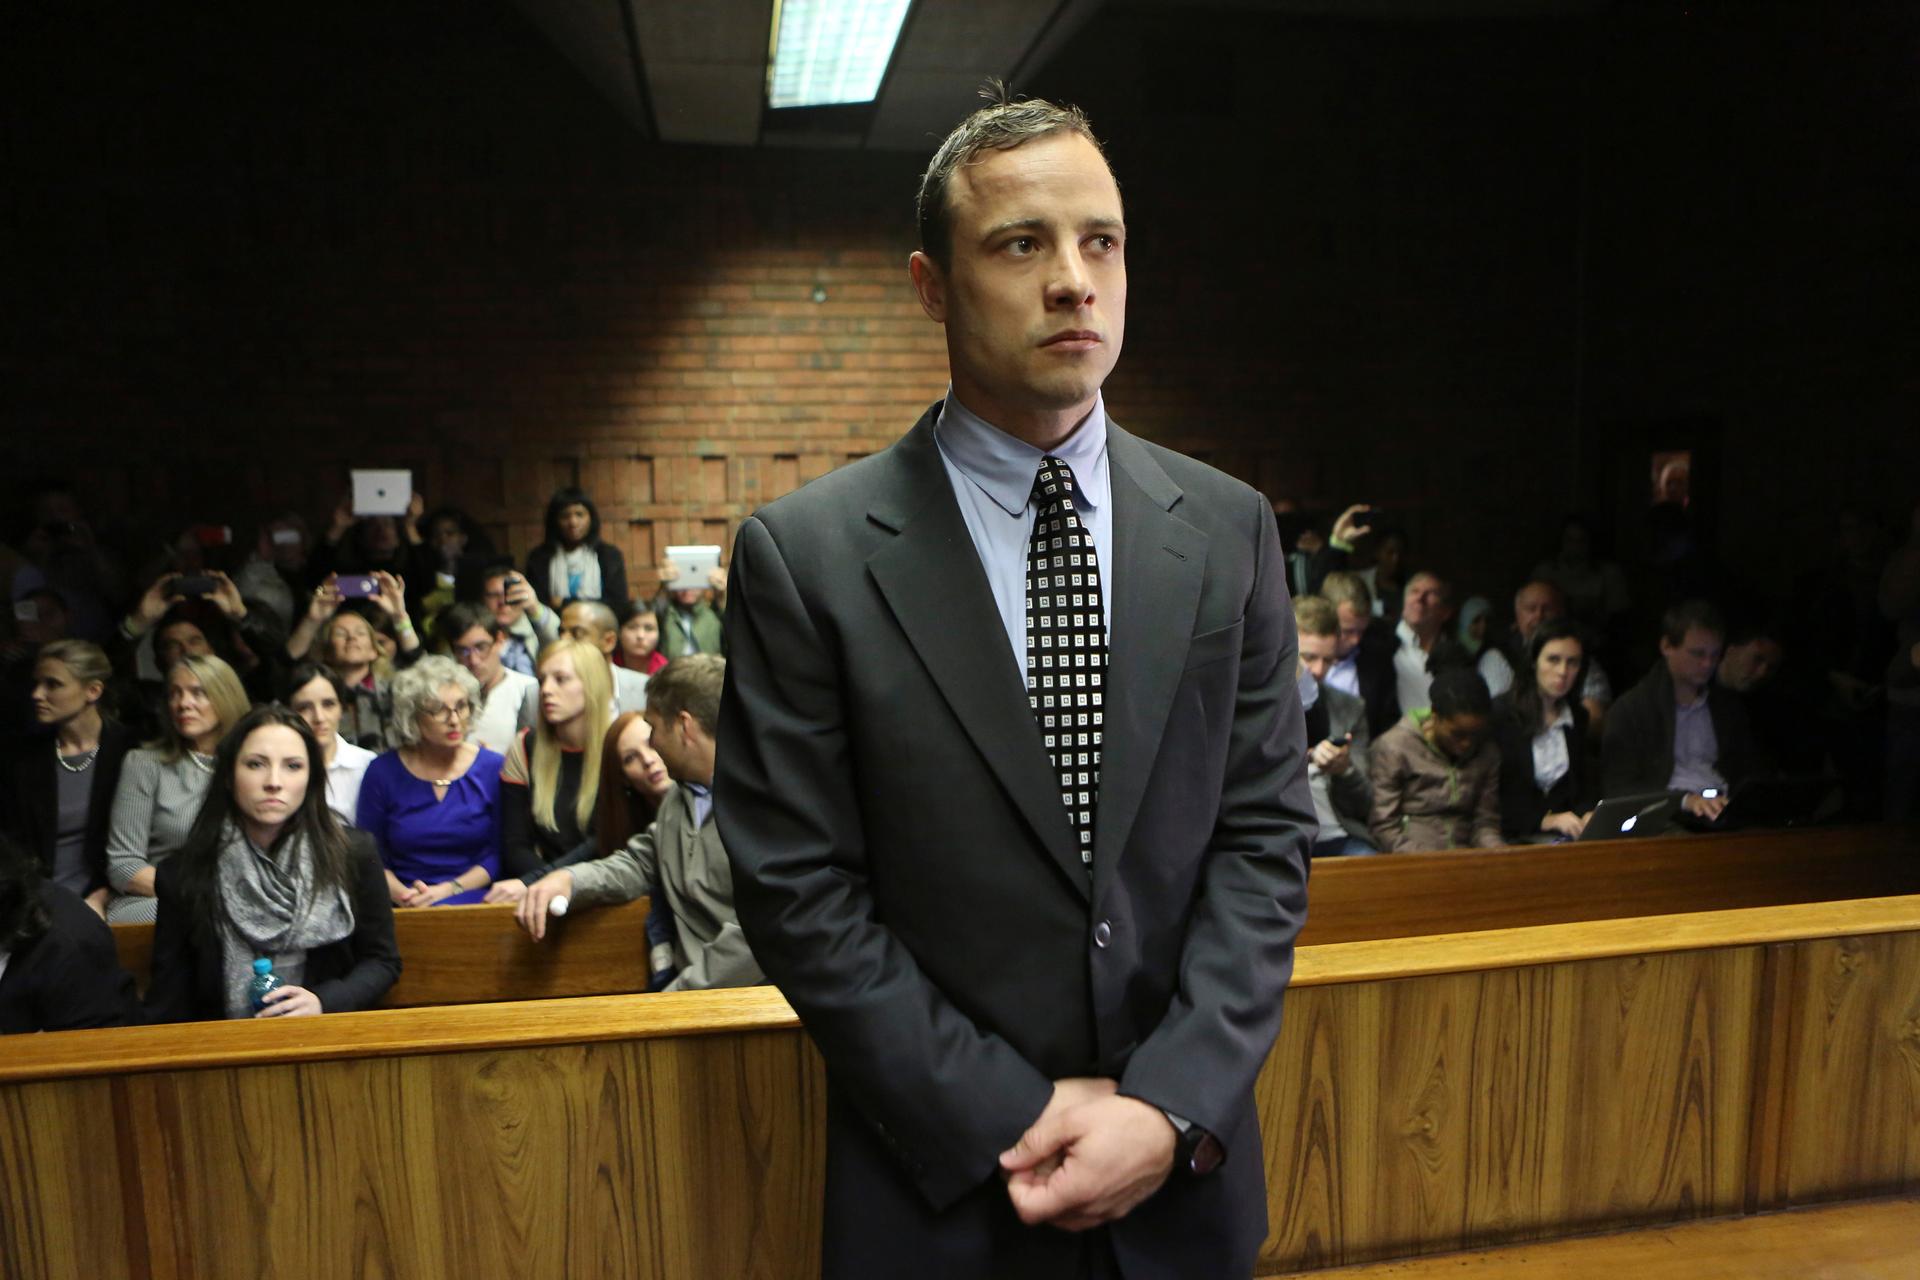 Oscar Pistorius enters the dock before court proceedings at the Pretoria Magistrates court in 2013. 